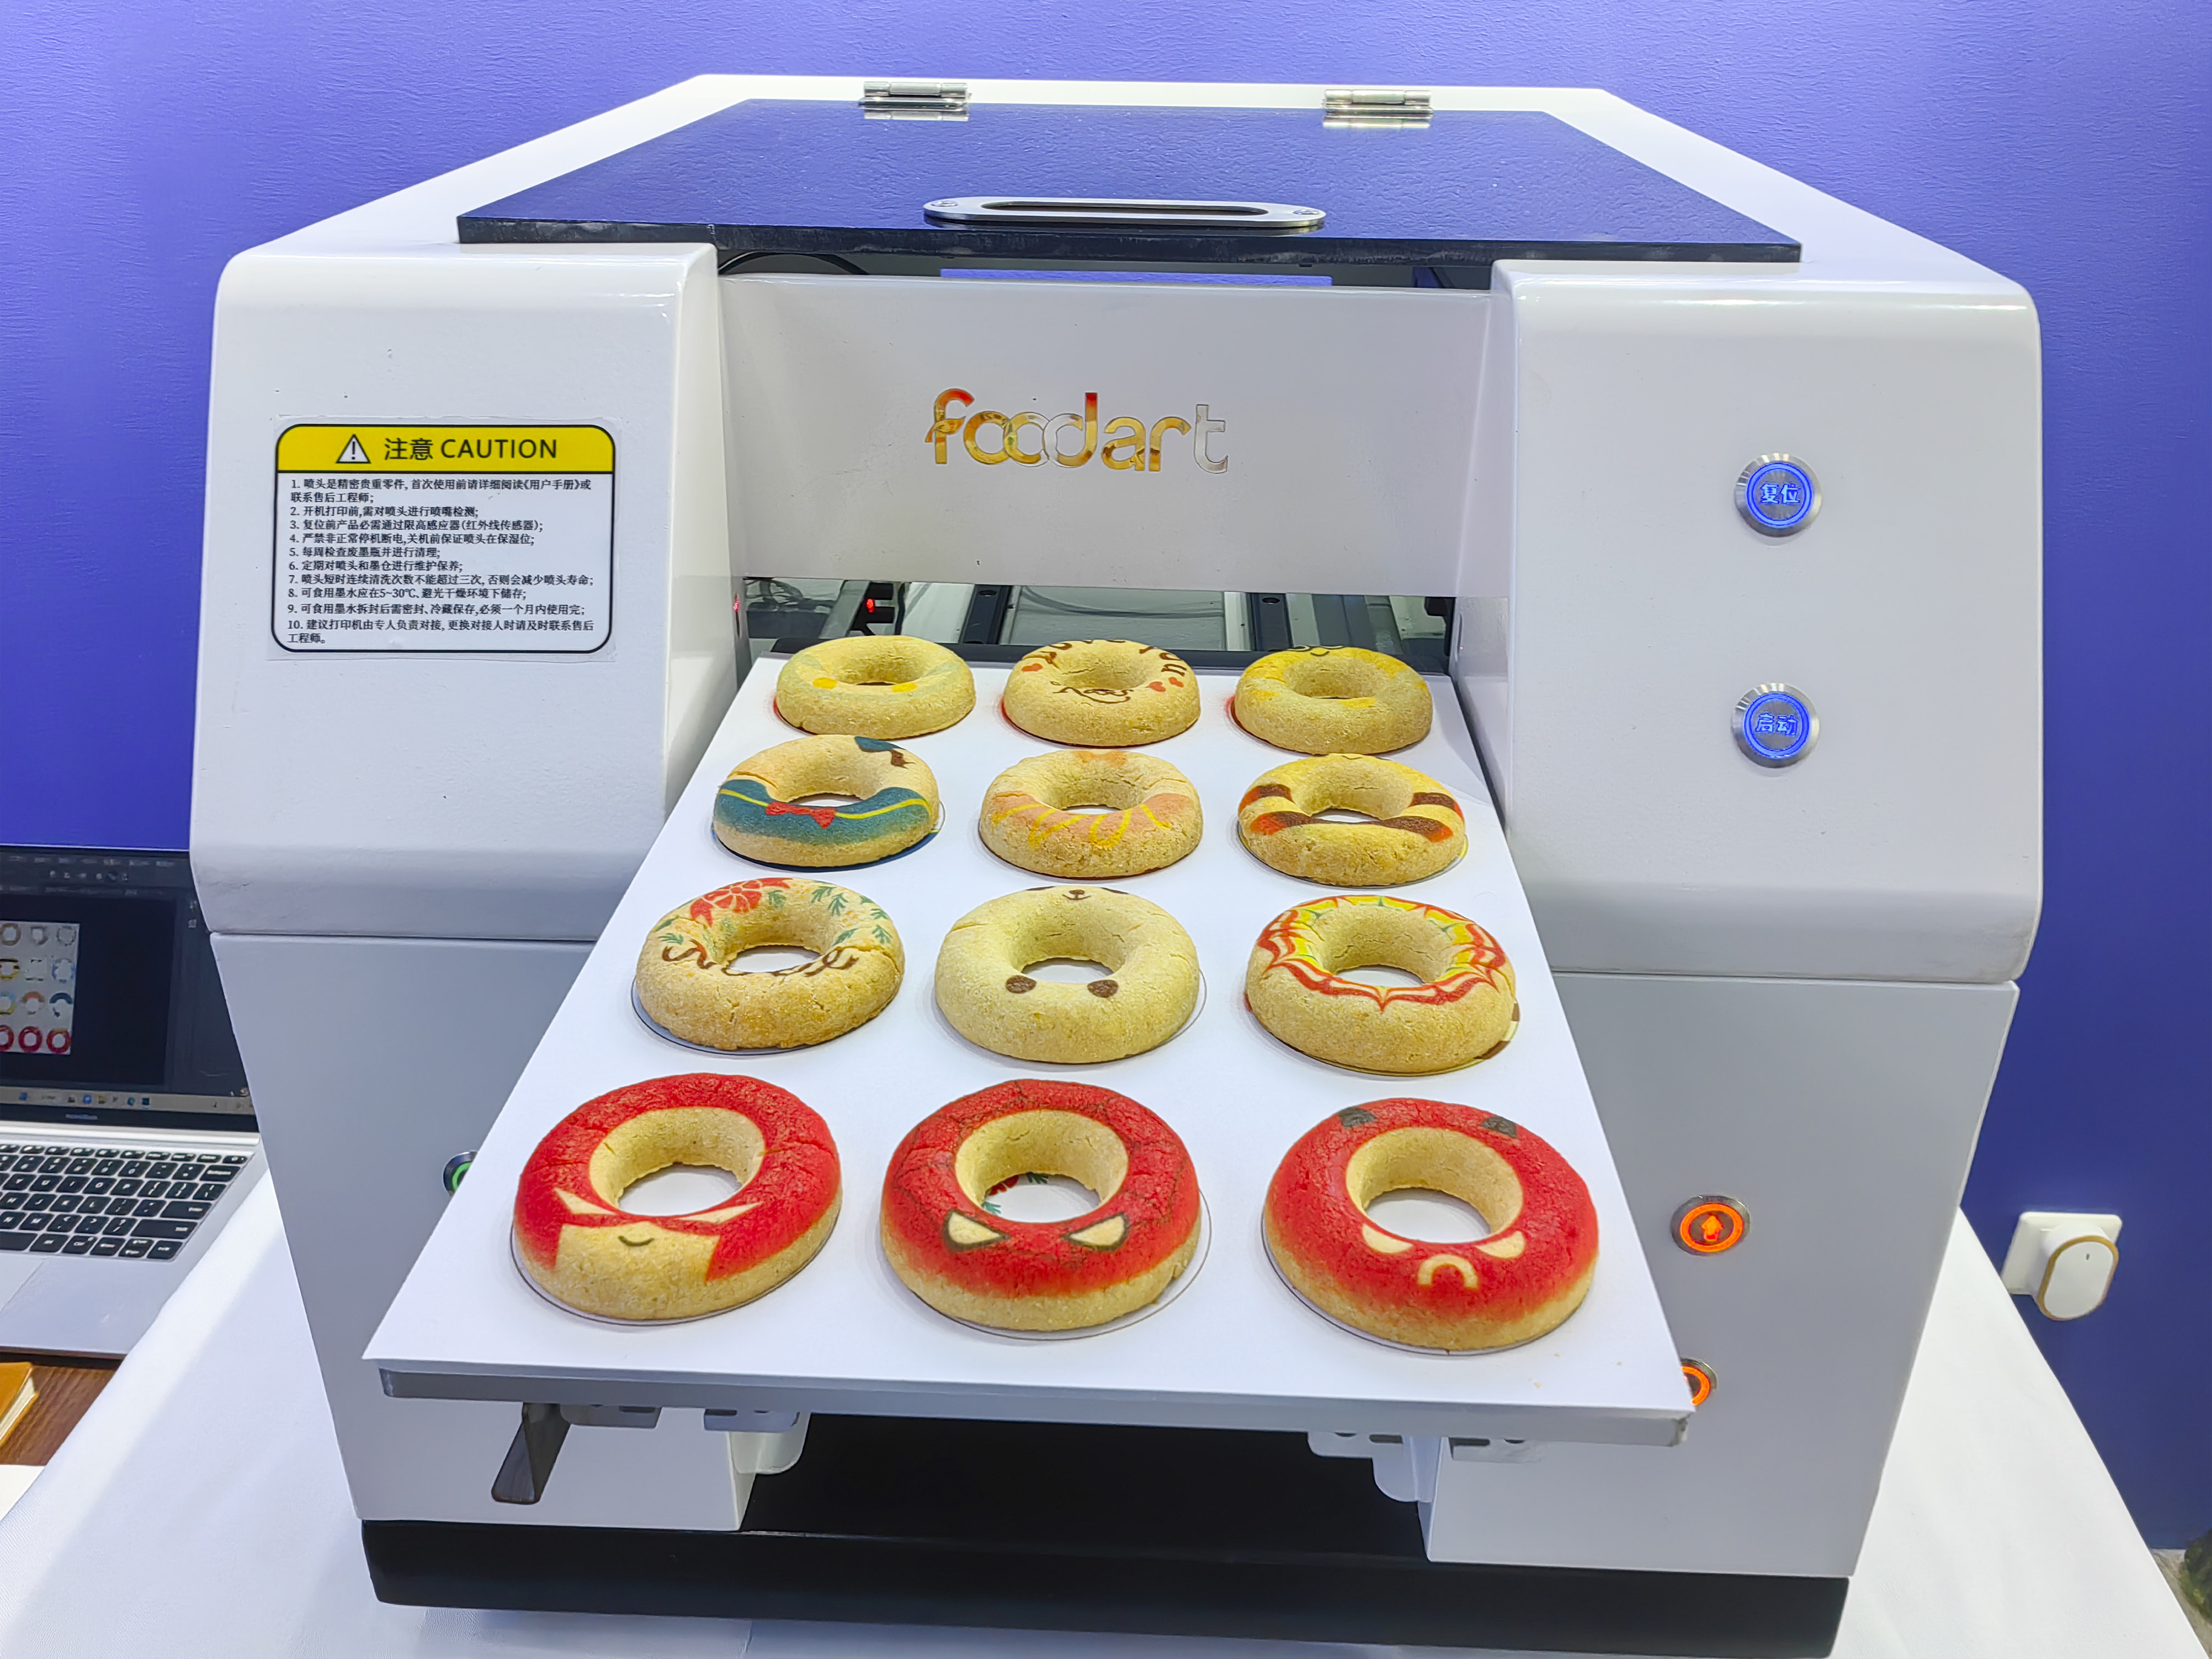 Food Printing Technology new food printing machine to print creative circle biscuits, so that you can see the circle